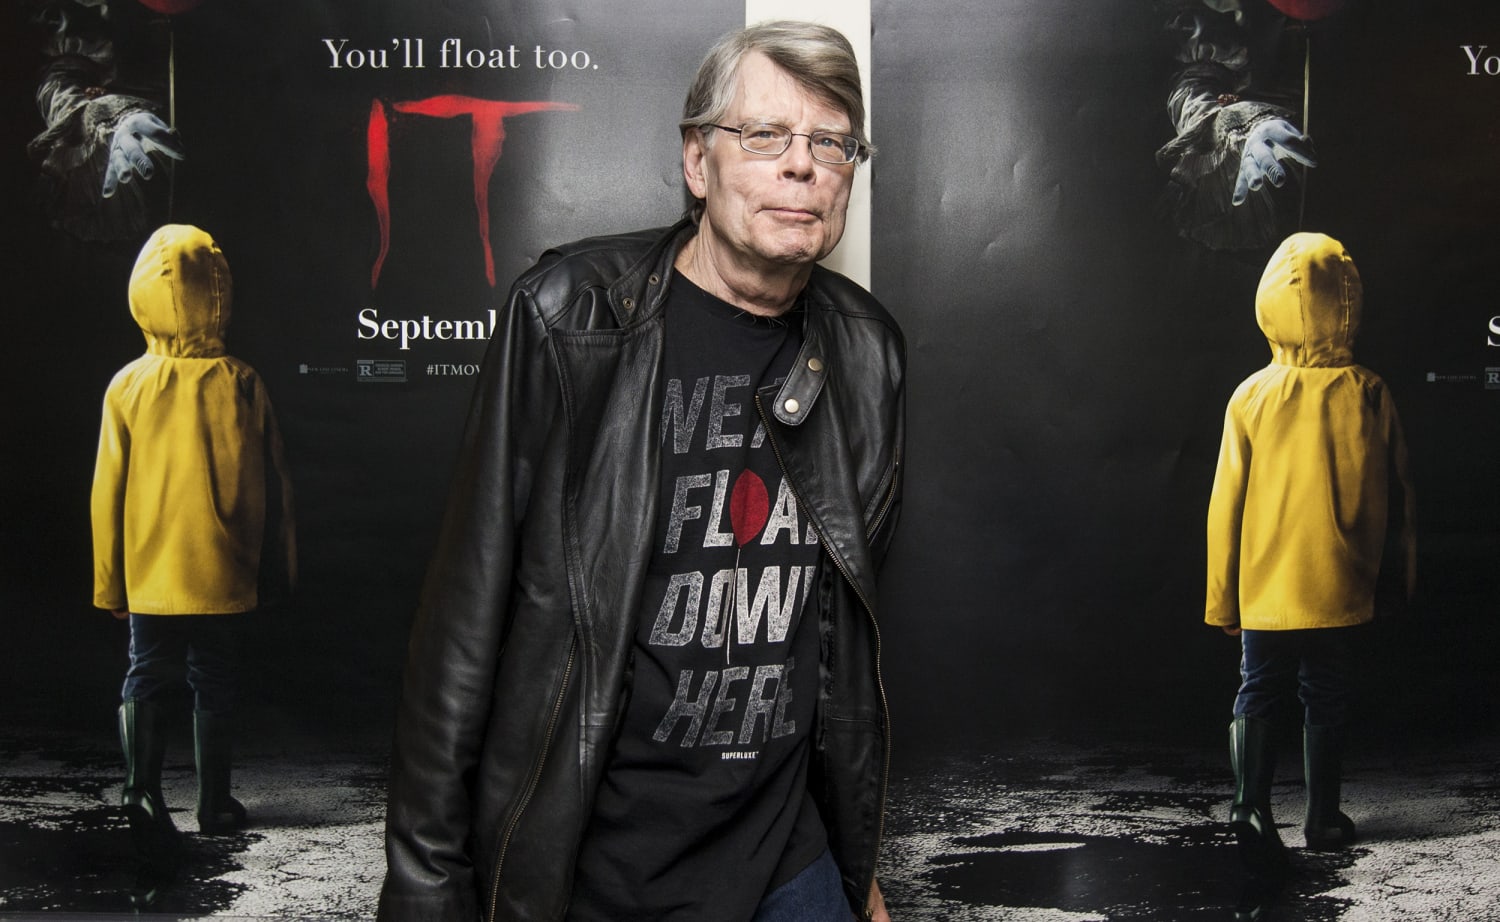 Dead by Daylight' Director Wants Stephen King Union - Bloody Disgusting